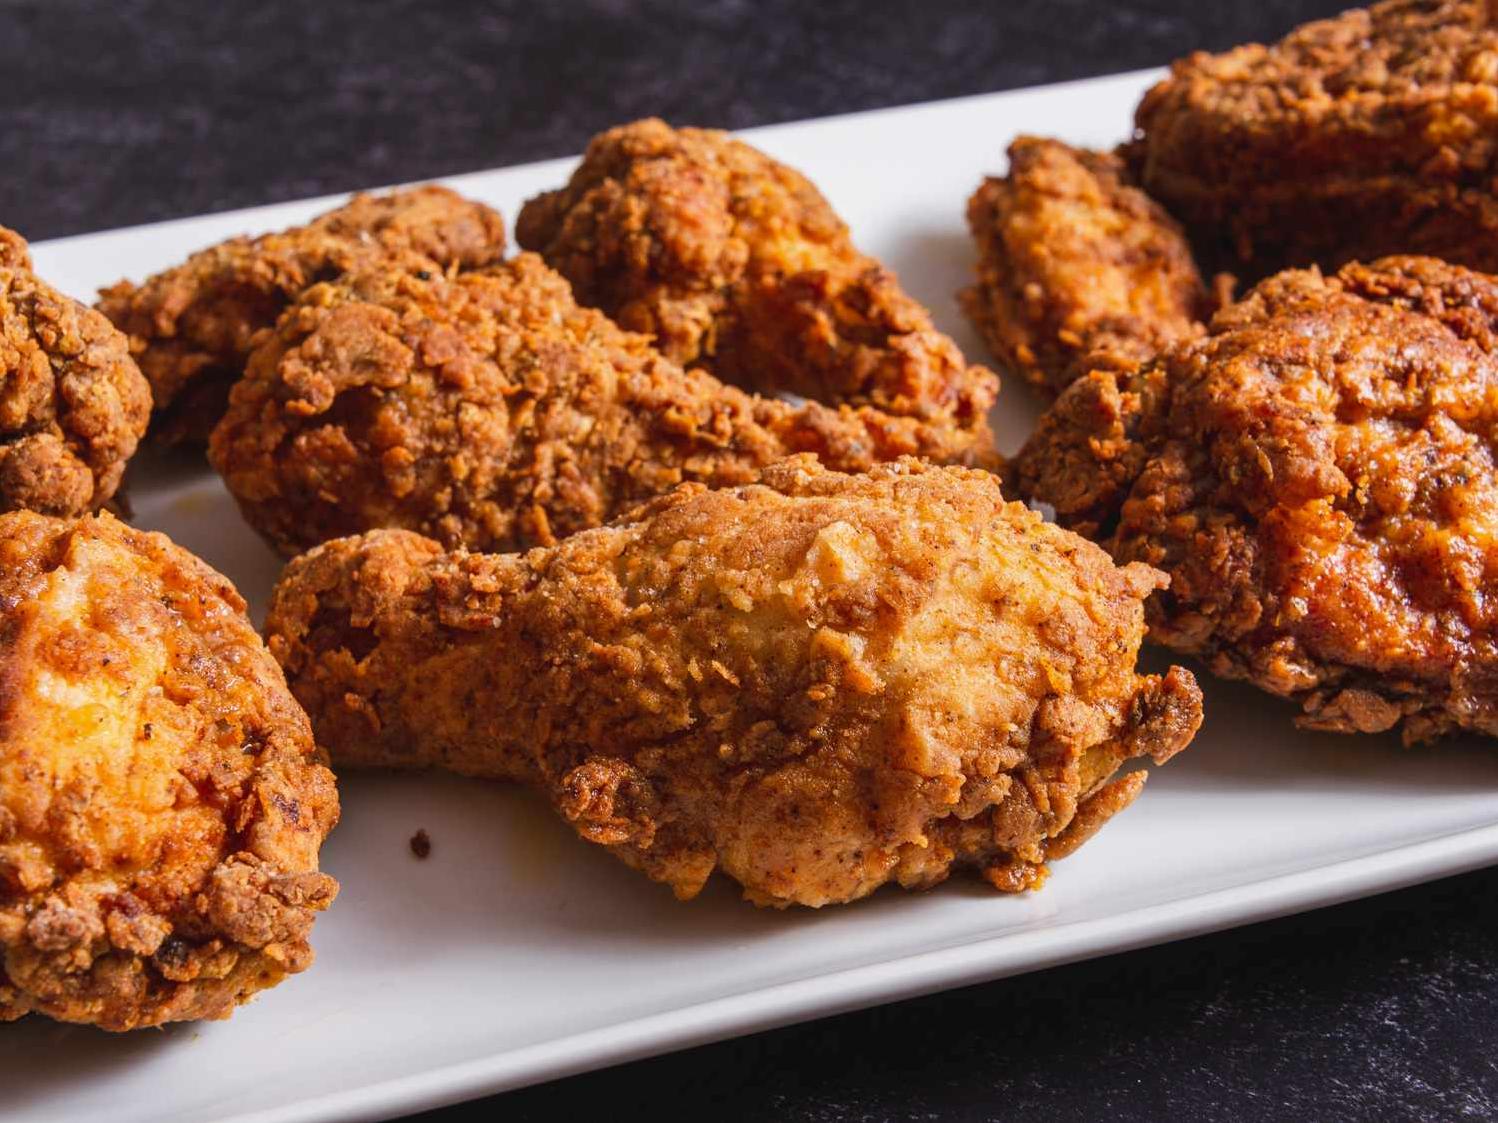  Don't be intimidated by frying chicken, let's get started!